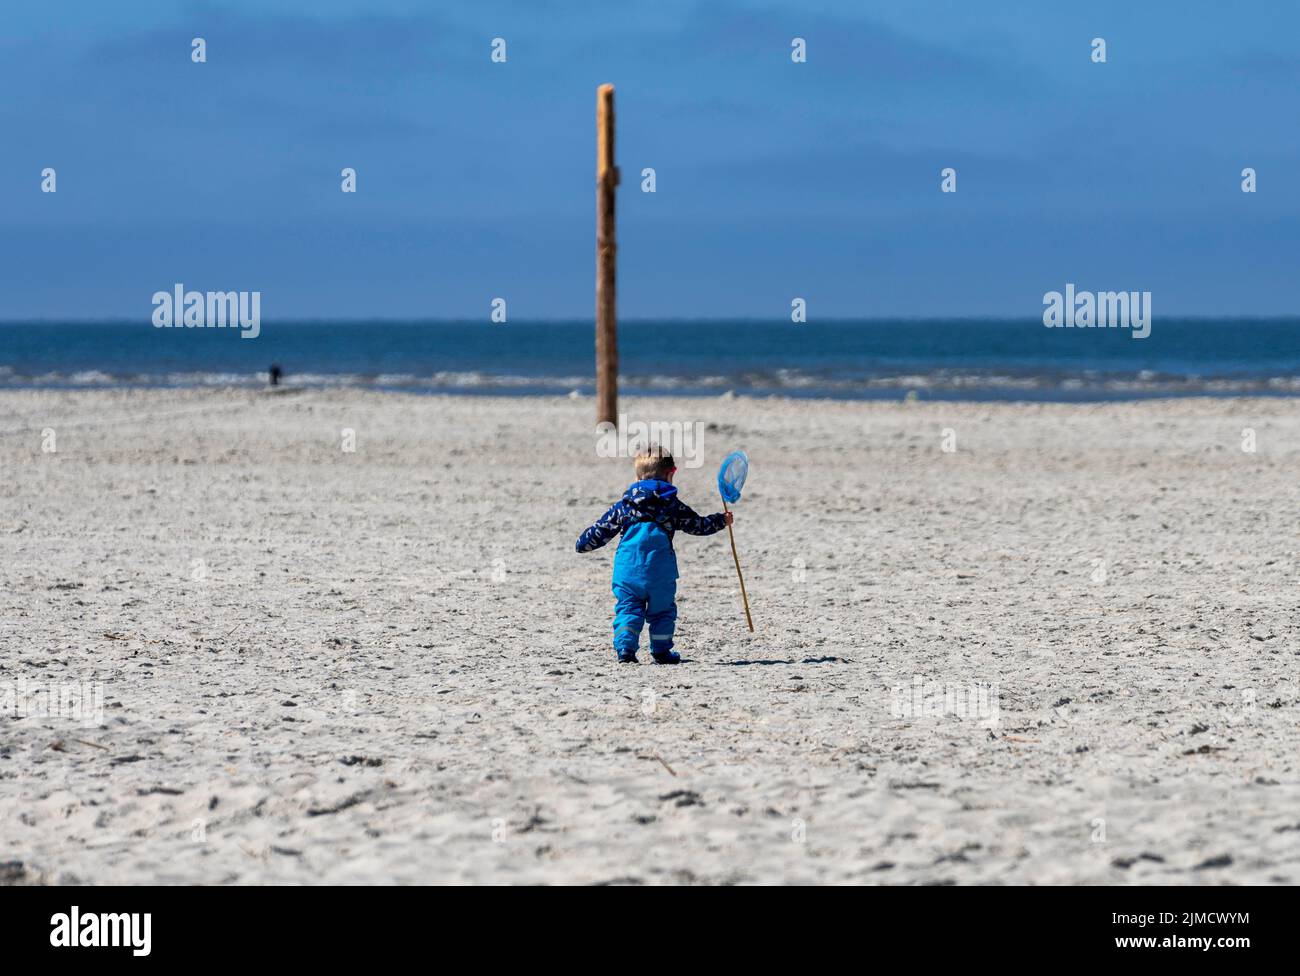 Toddler on the beach of the Baltic Sea, Sankt Peter Ording, Schleswig Holstein, Germany Stock Photo